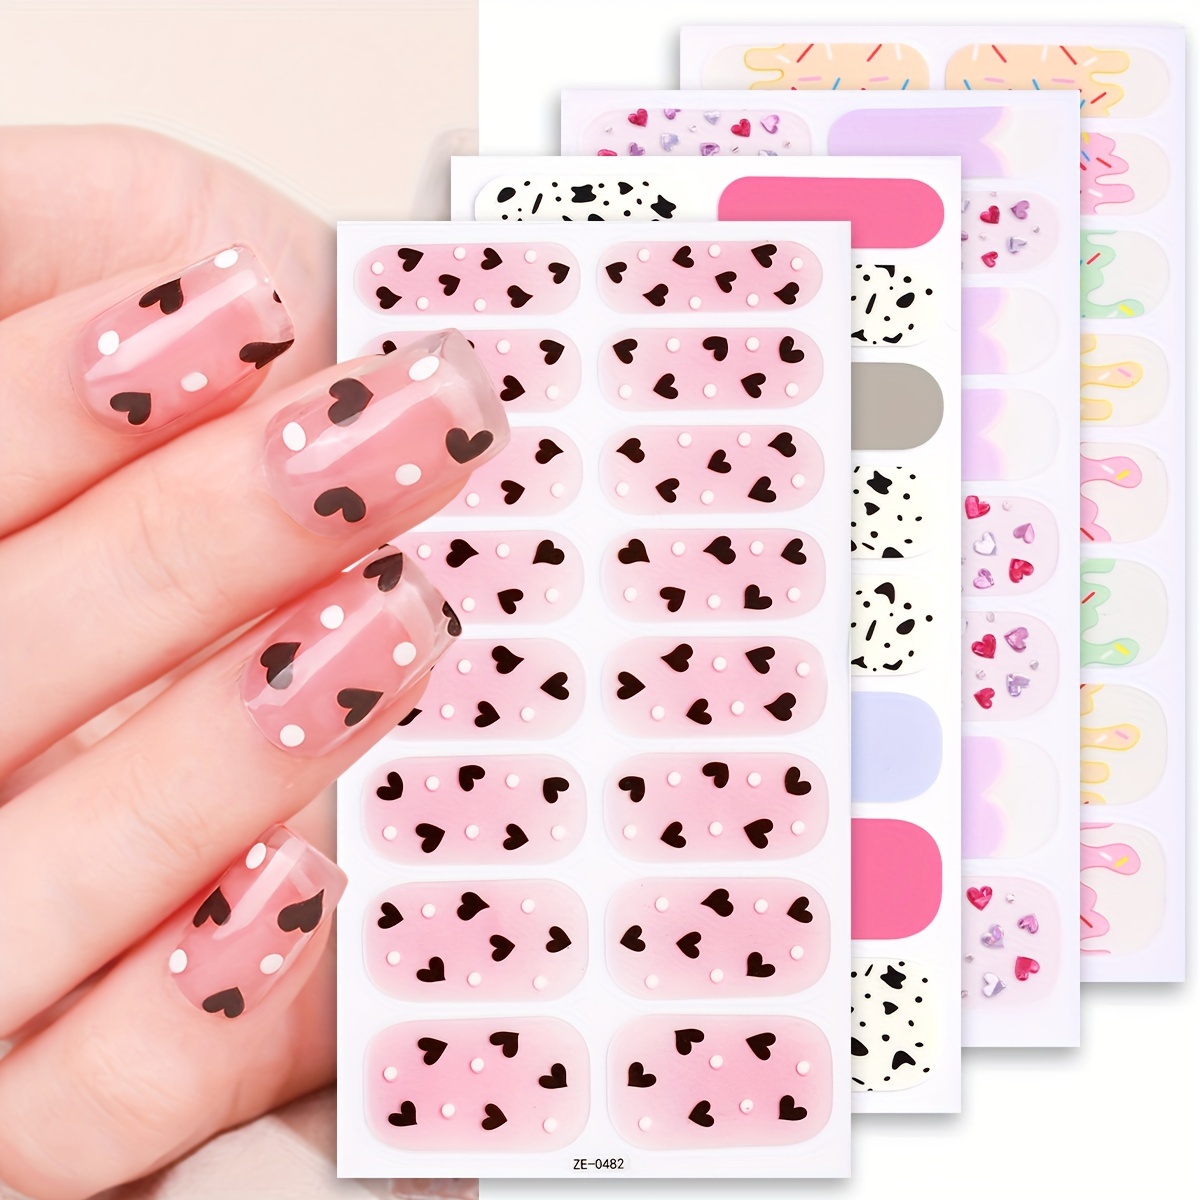 

Spring & Summer Polka Dot Nail Polish Strips - 4 Sheets With Bonus Nail File, Easy Apply Full Wraps For Hands & Feet, Sparkle Finish, No Scent